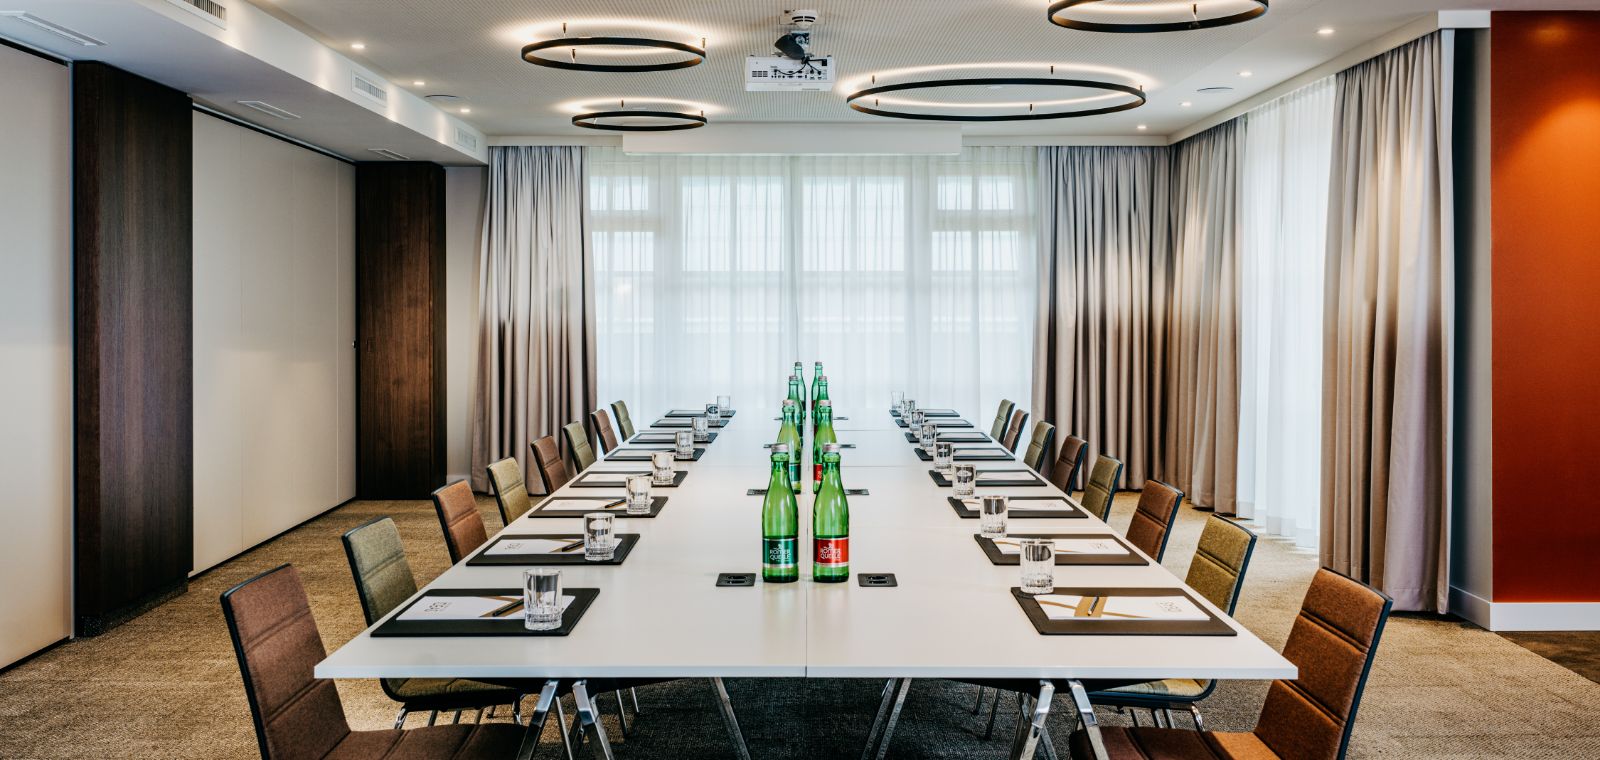 A big but cosy meeting room in cosy light at an eventlocation in Kitzbühel